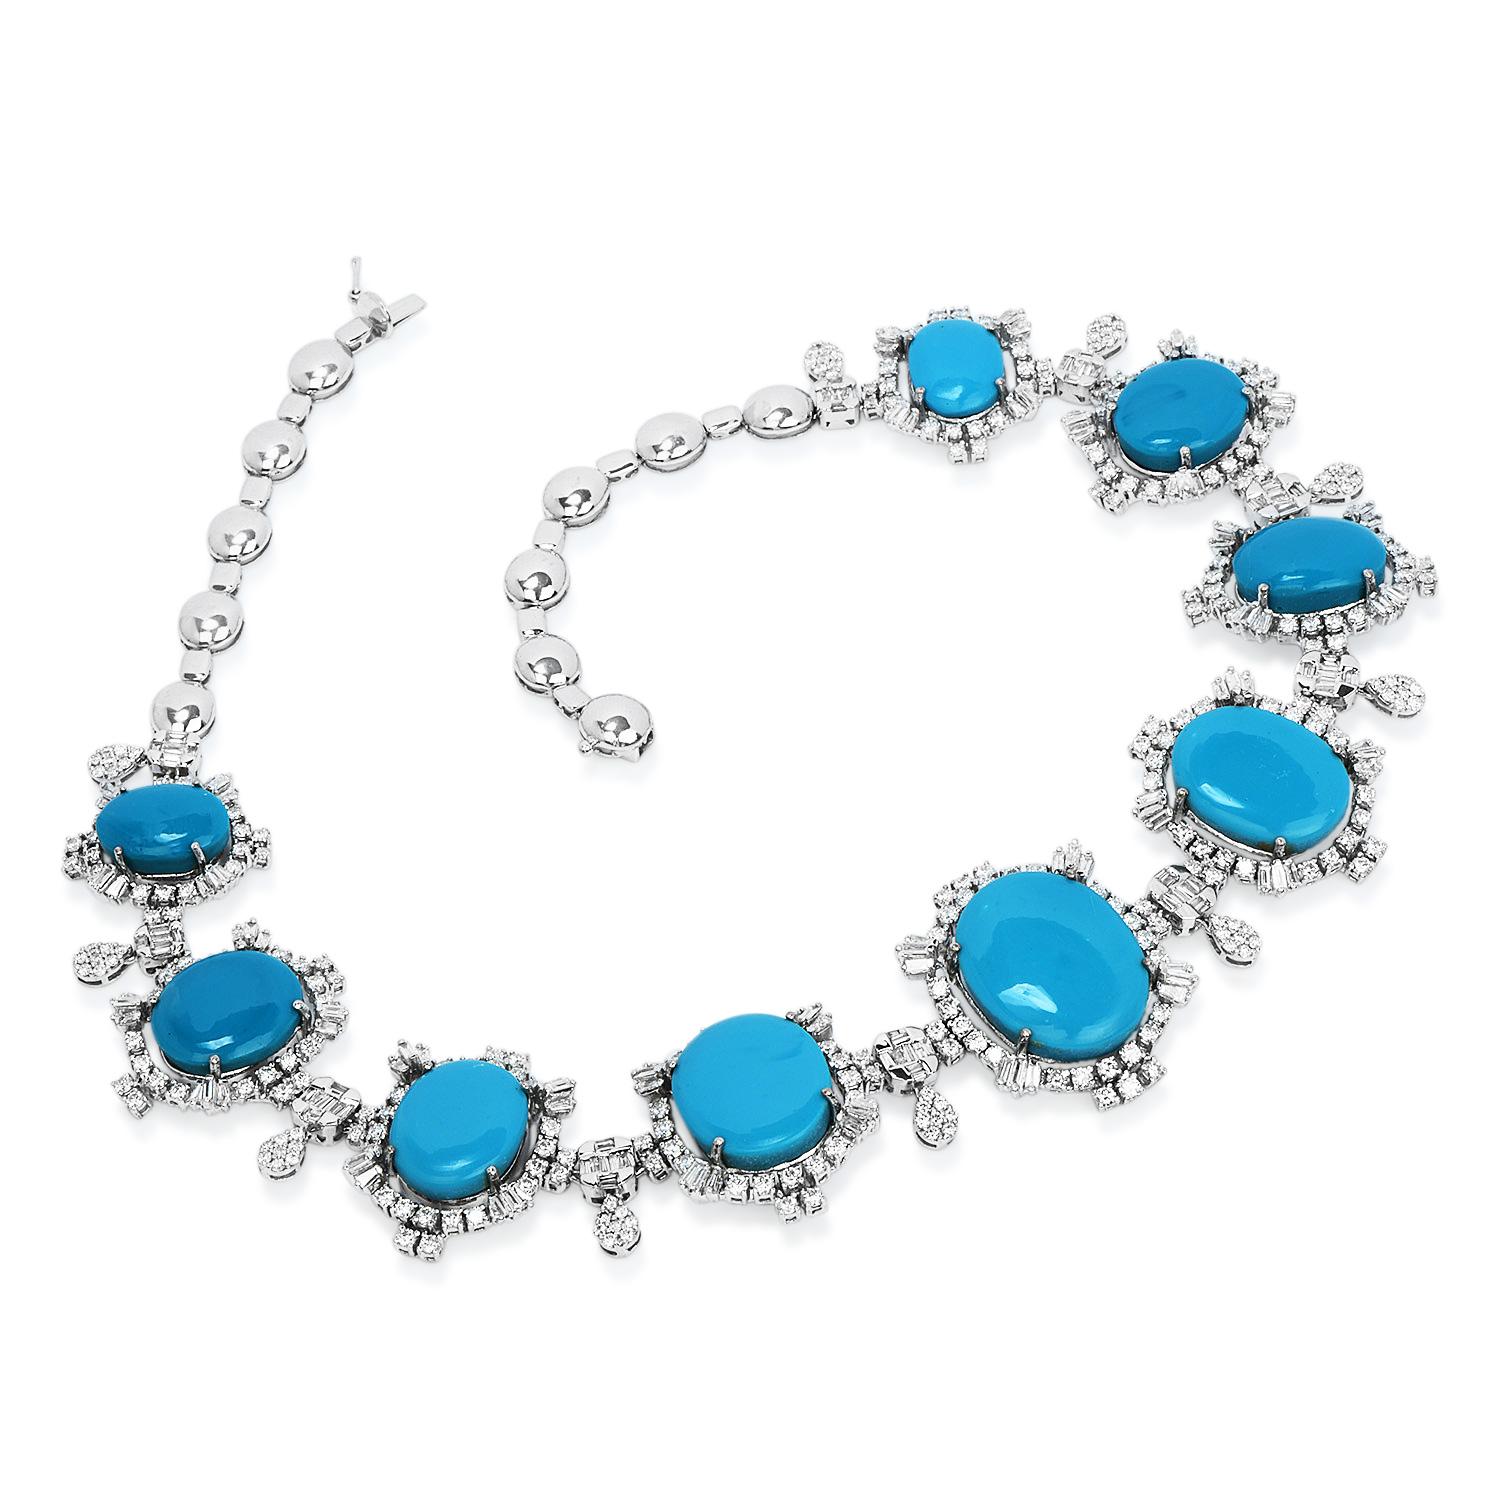 Turquoise is one of the most known gemstones in all cultures across the globe, 

presenting this high quality graduated link Diamond & Turquoise necklace, that will enhance the beauty and inspire calm and good luck to its wearer.

Crafted in solid